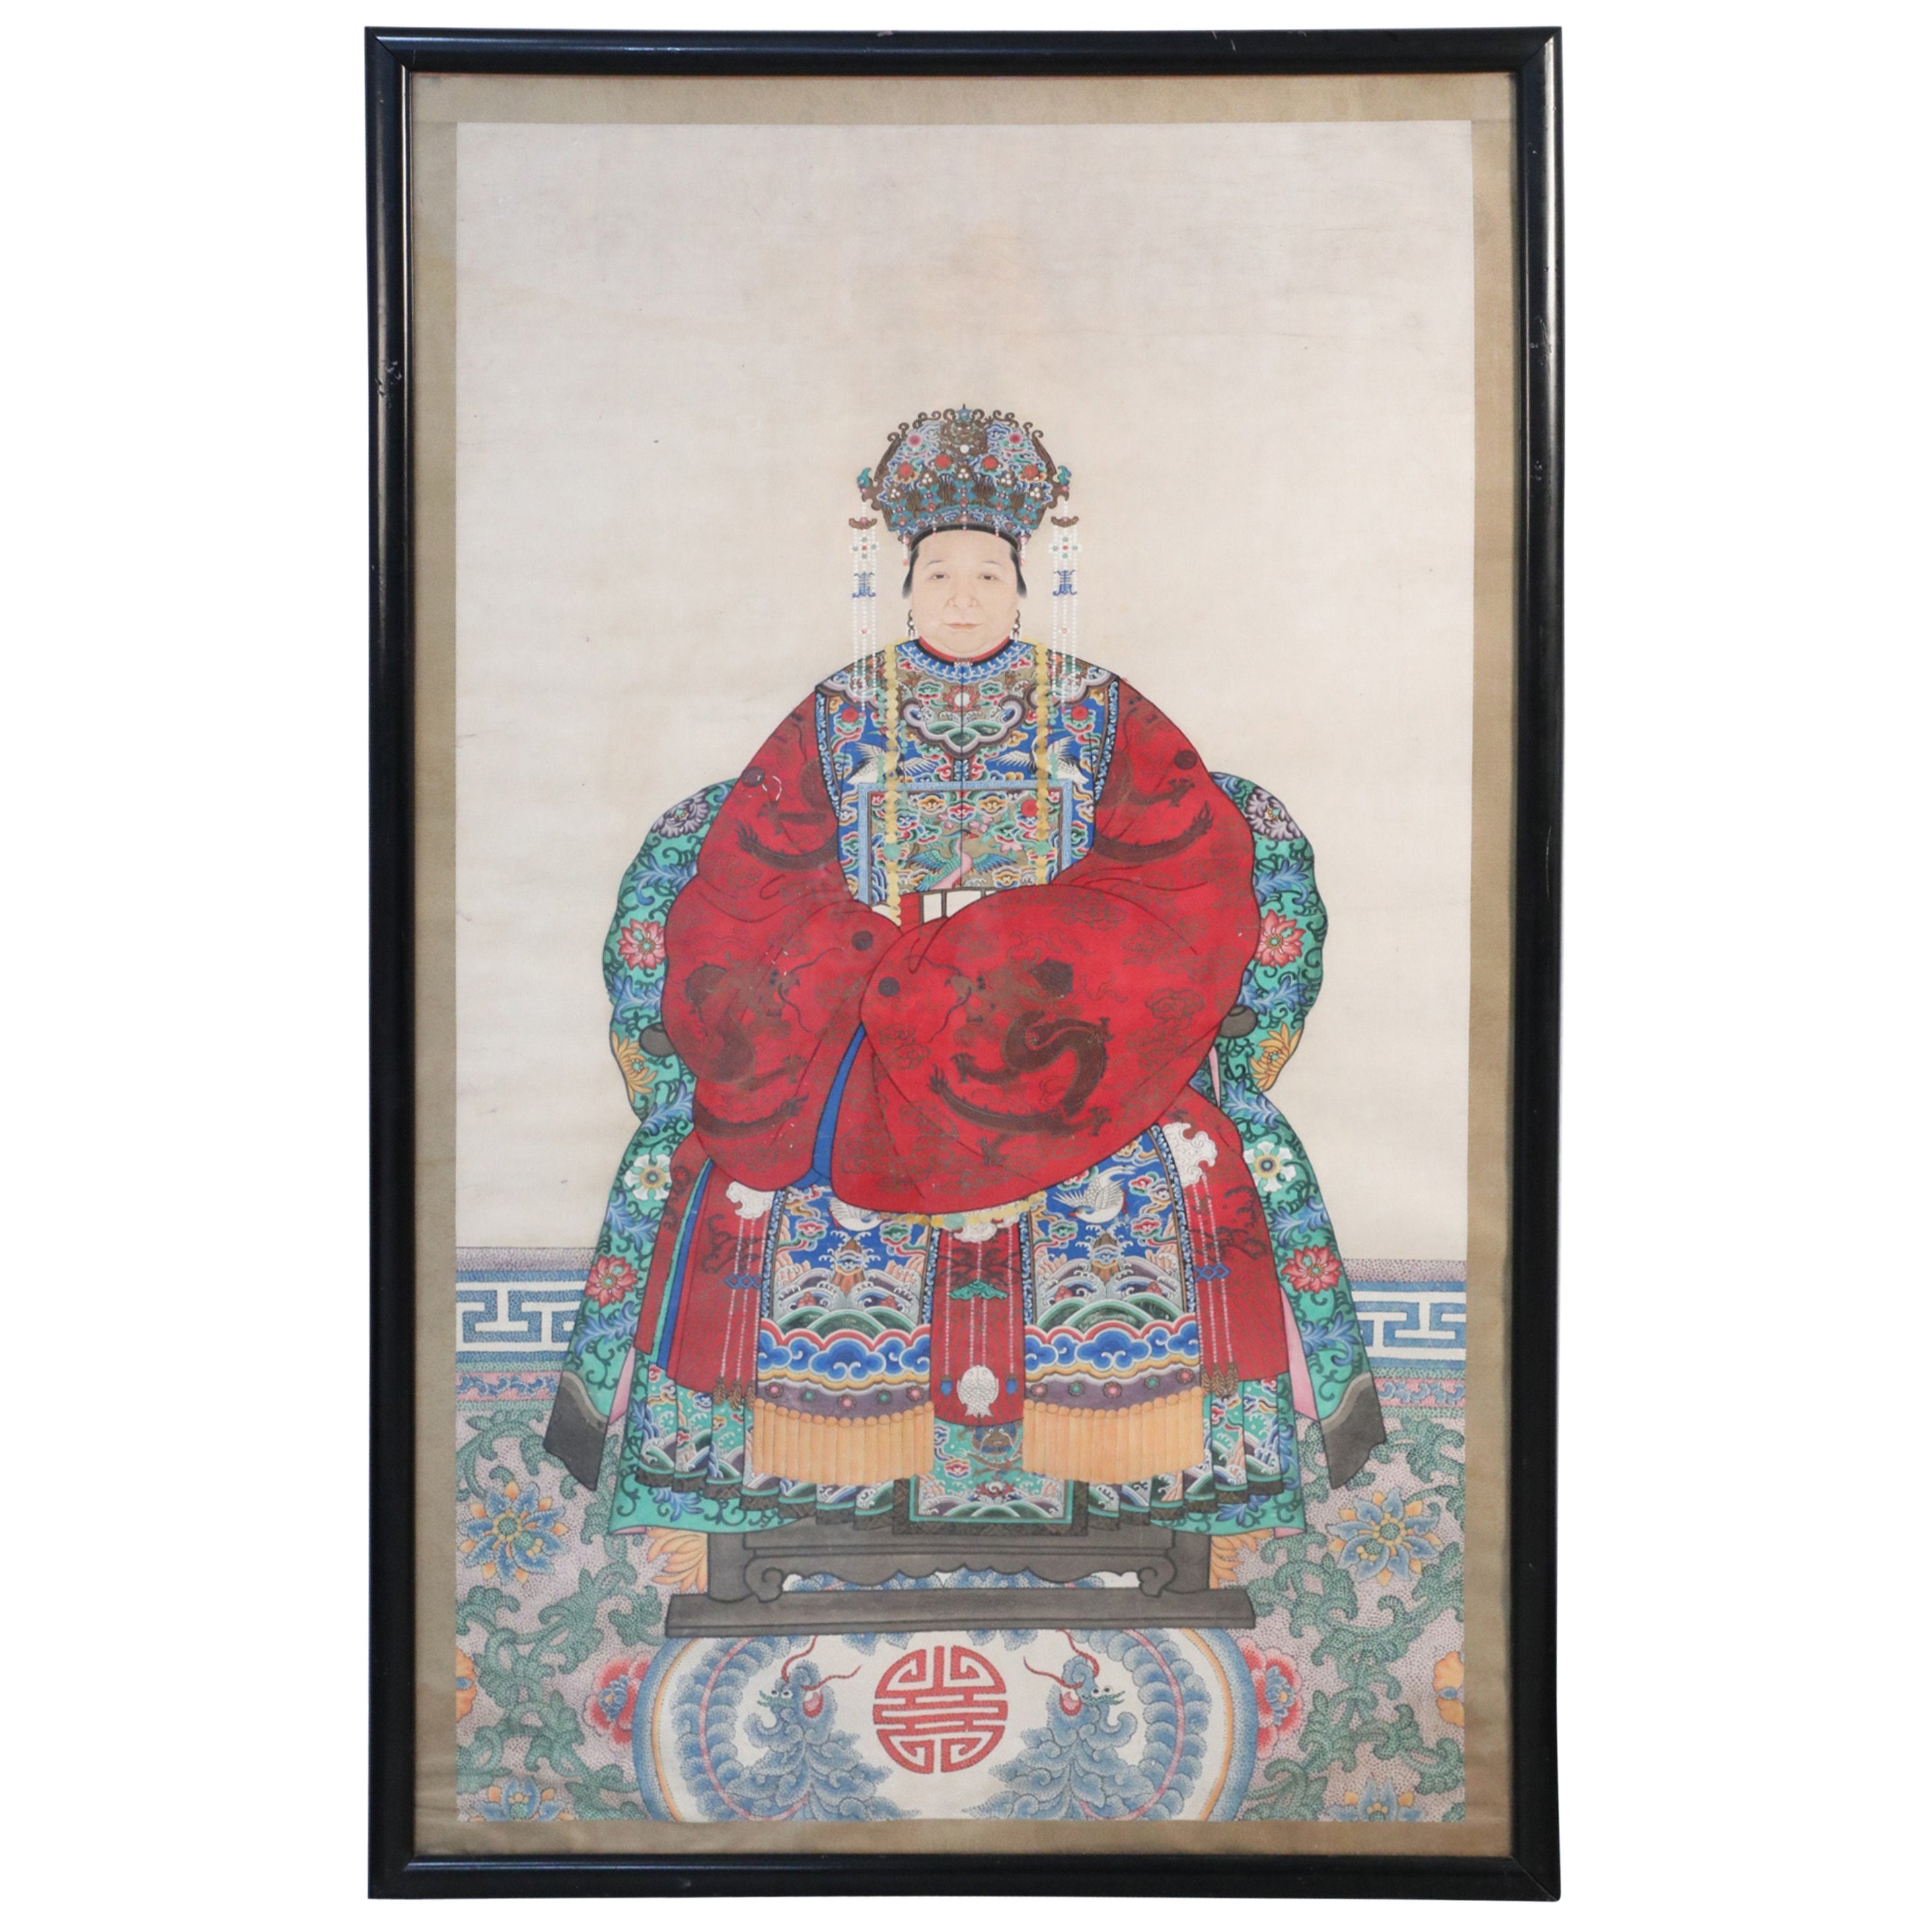 Framed Chinese Pen and Ink Ancestor Portrait in Red Dress